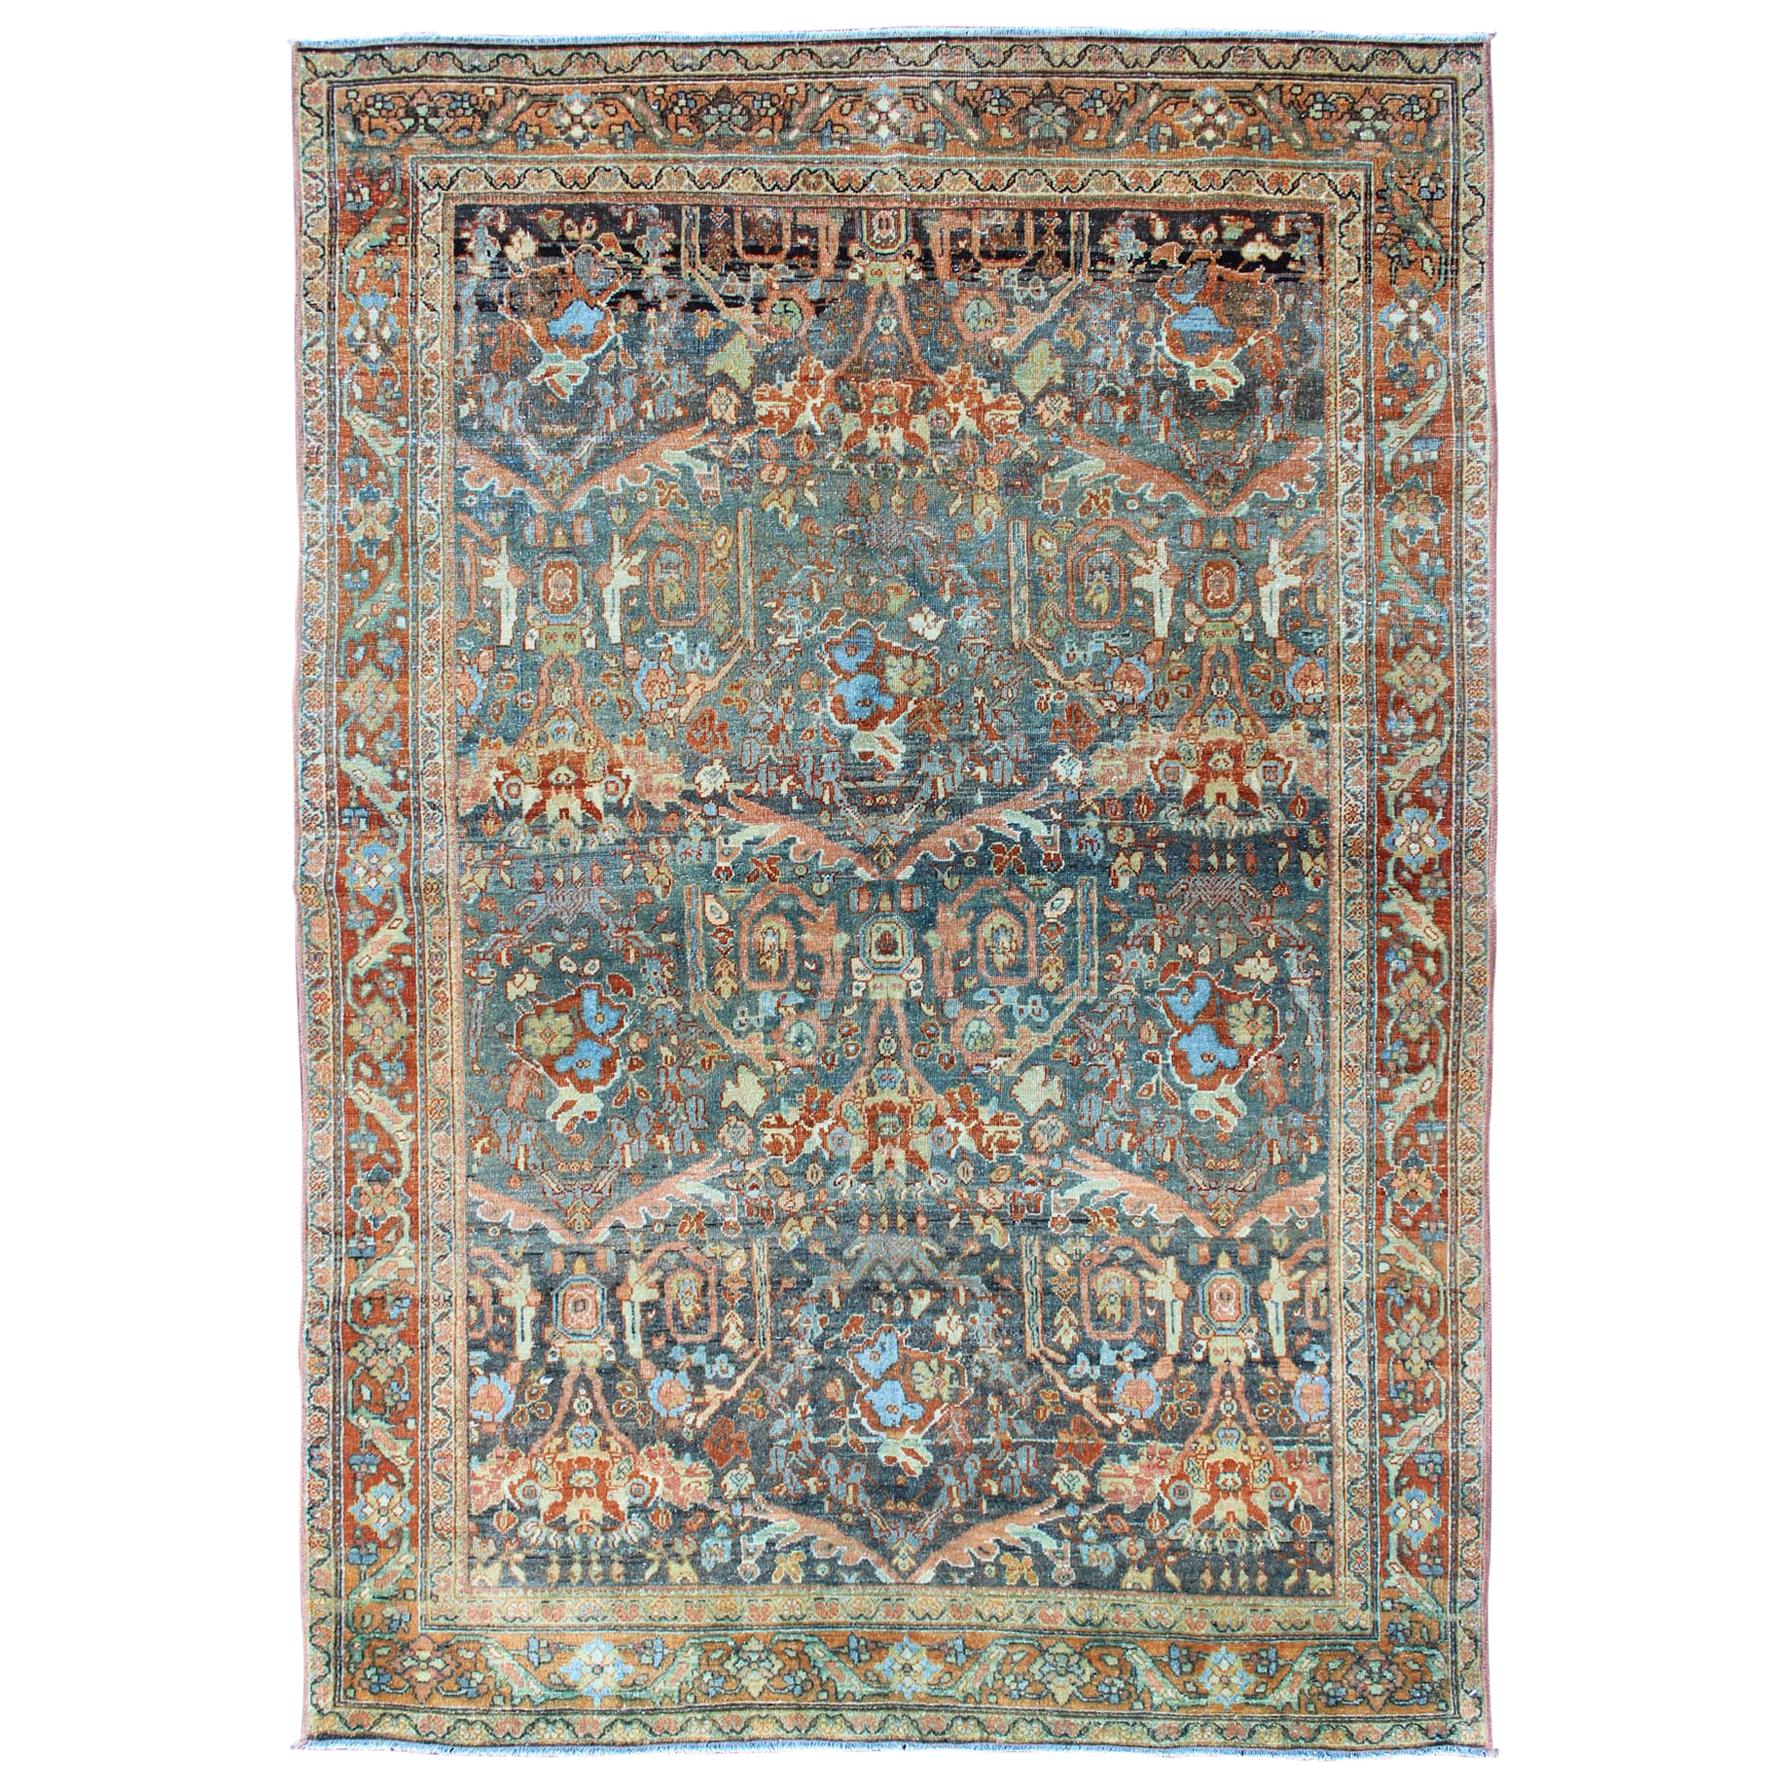 All-Over Design Antique Persian Tabriz Rug with Flowing Florals